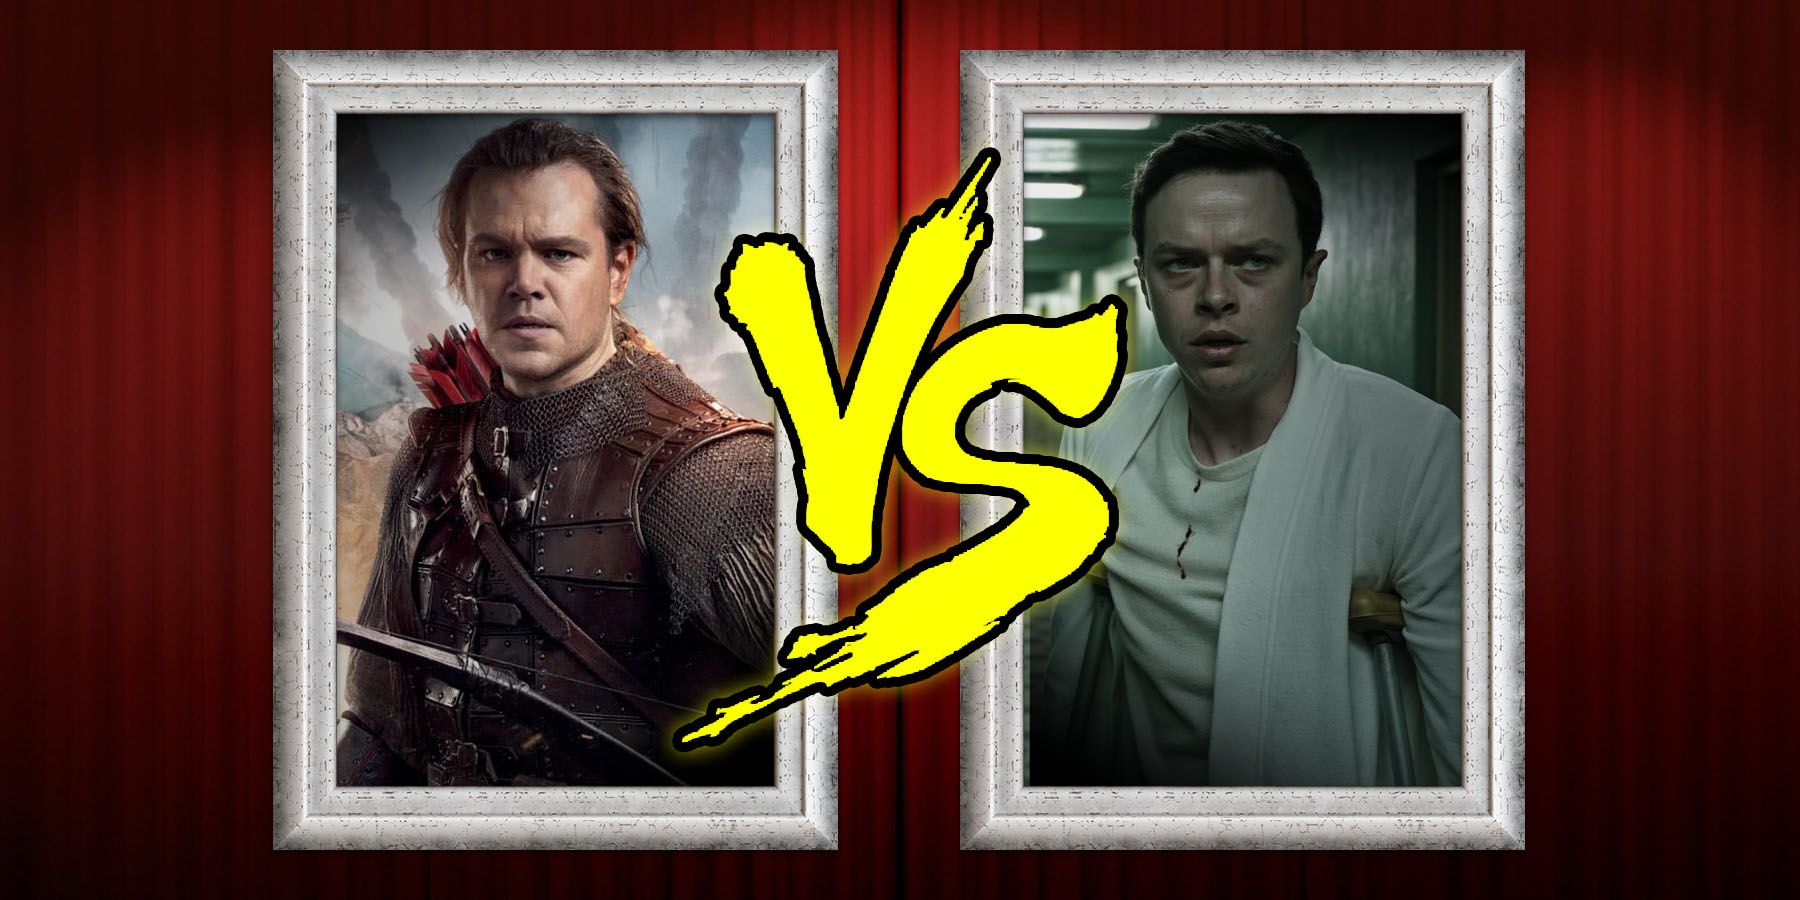 2017 Box Office - The Great Wall vs A Cure For Wellness